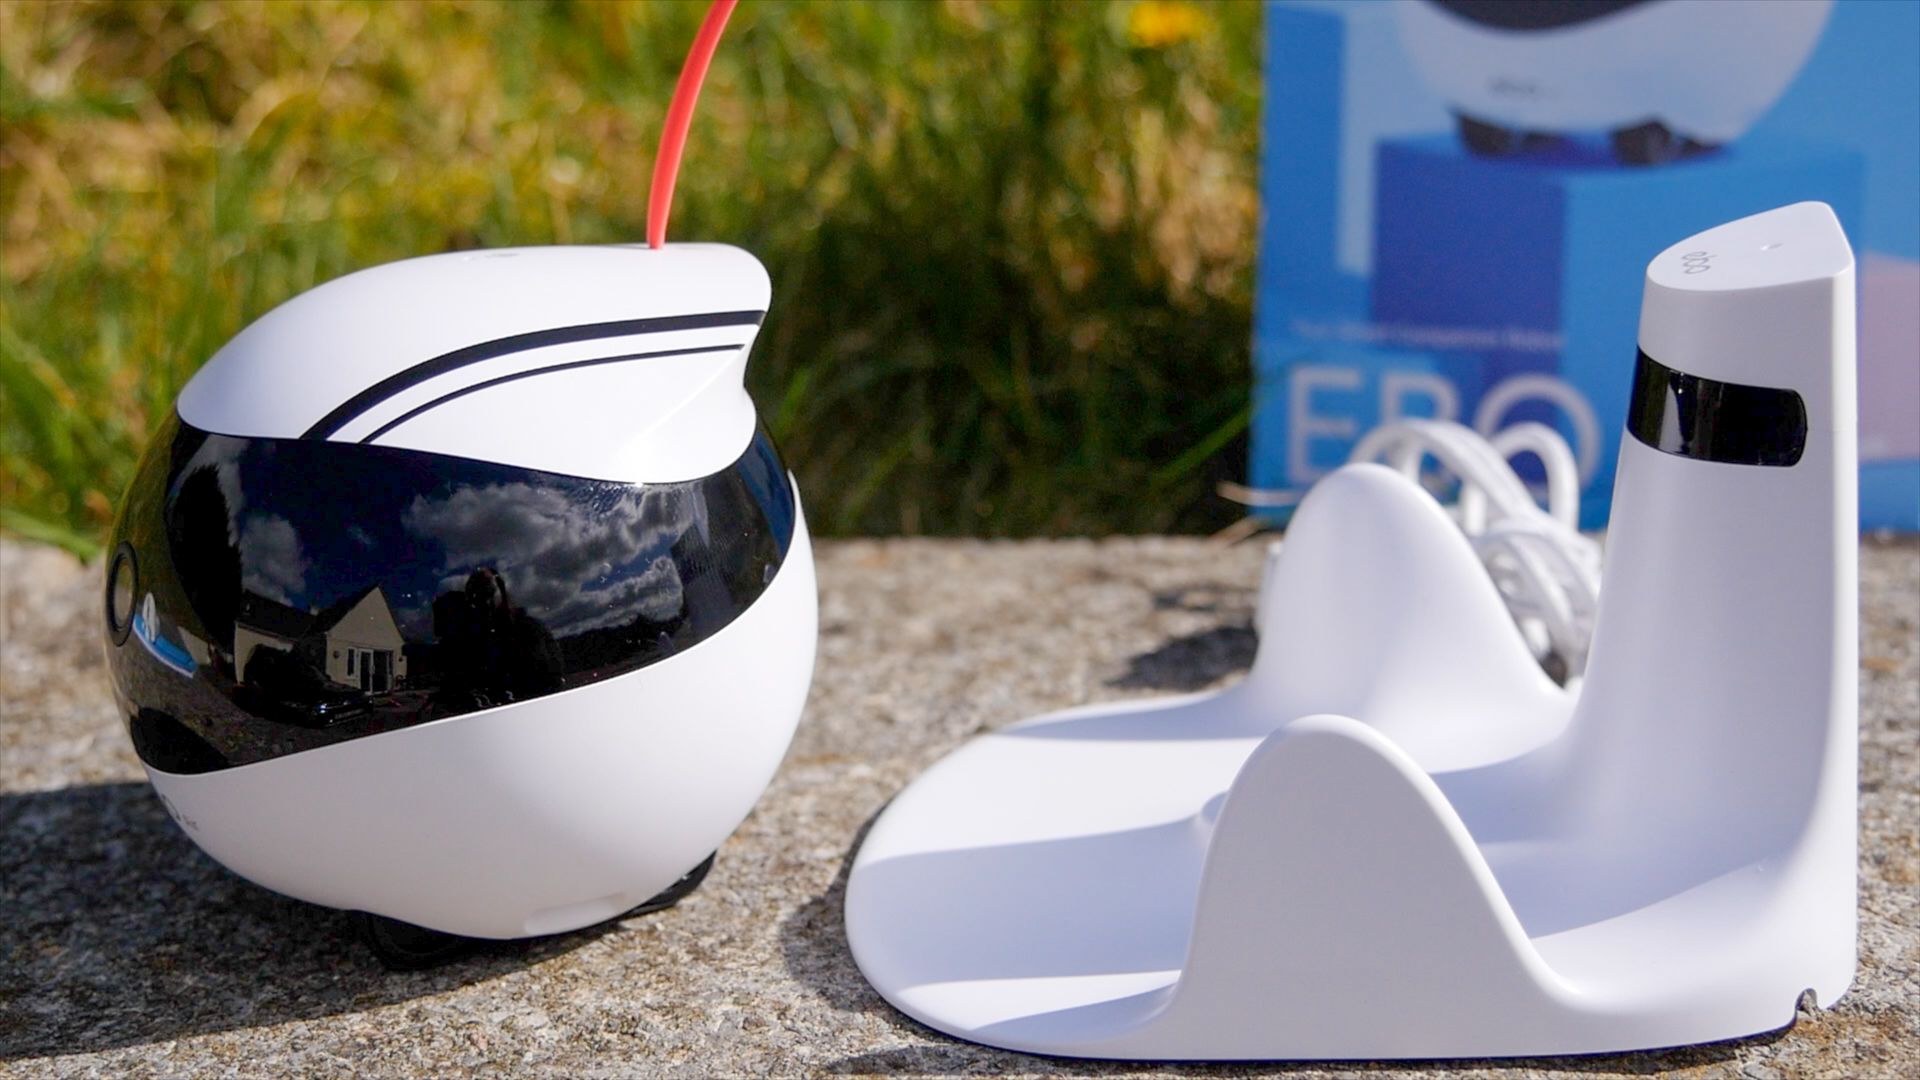 Enabot Ebo Pro Review: A Wobbly Robotic Toy for Your Cat